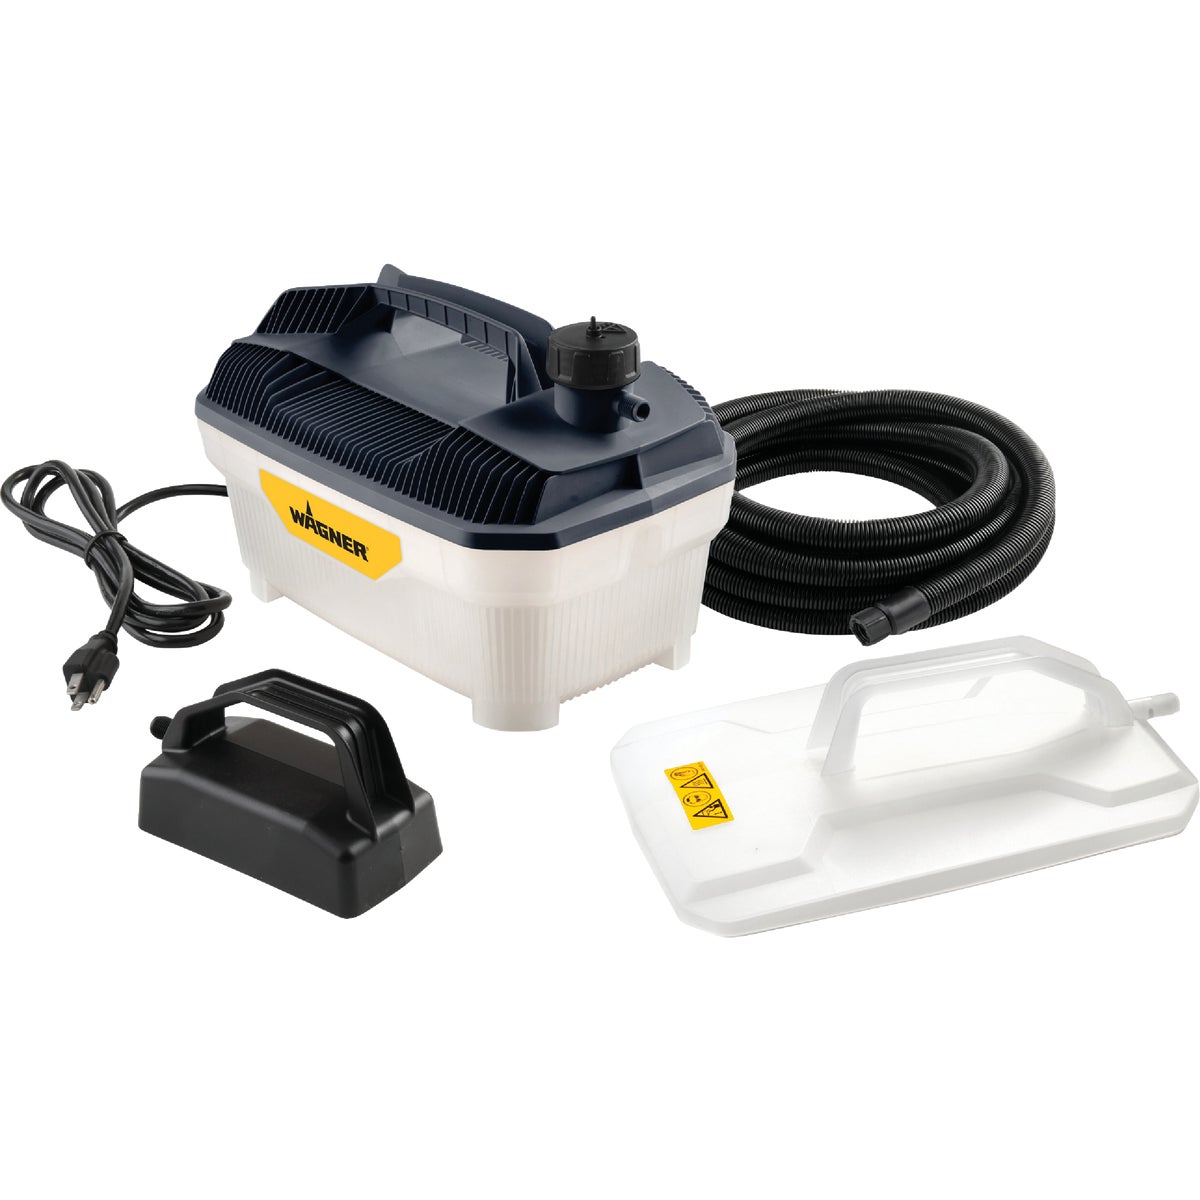 Wagner 2418627 725 Power Steamer Steam Cleaner for Wallpaper Removal (2 Steamplates Included)